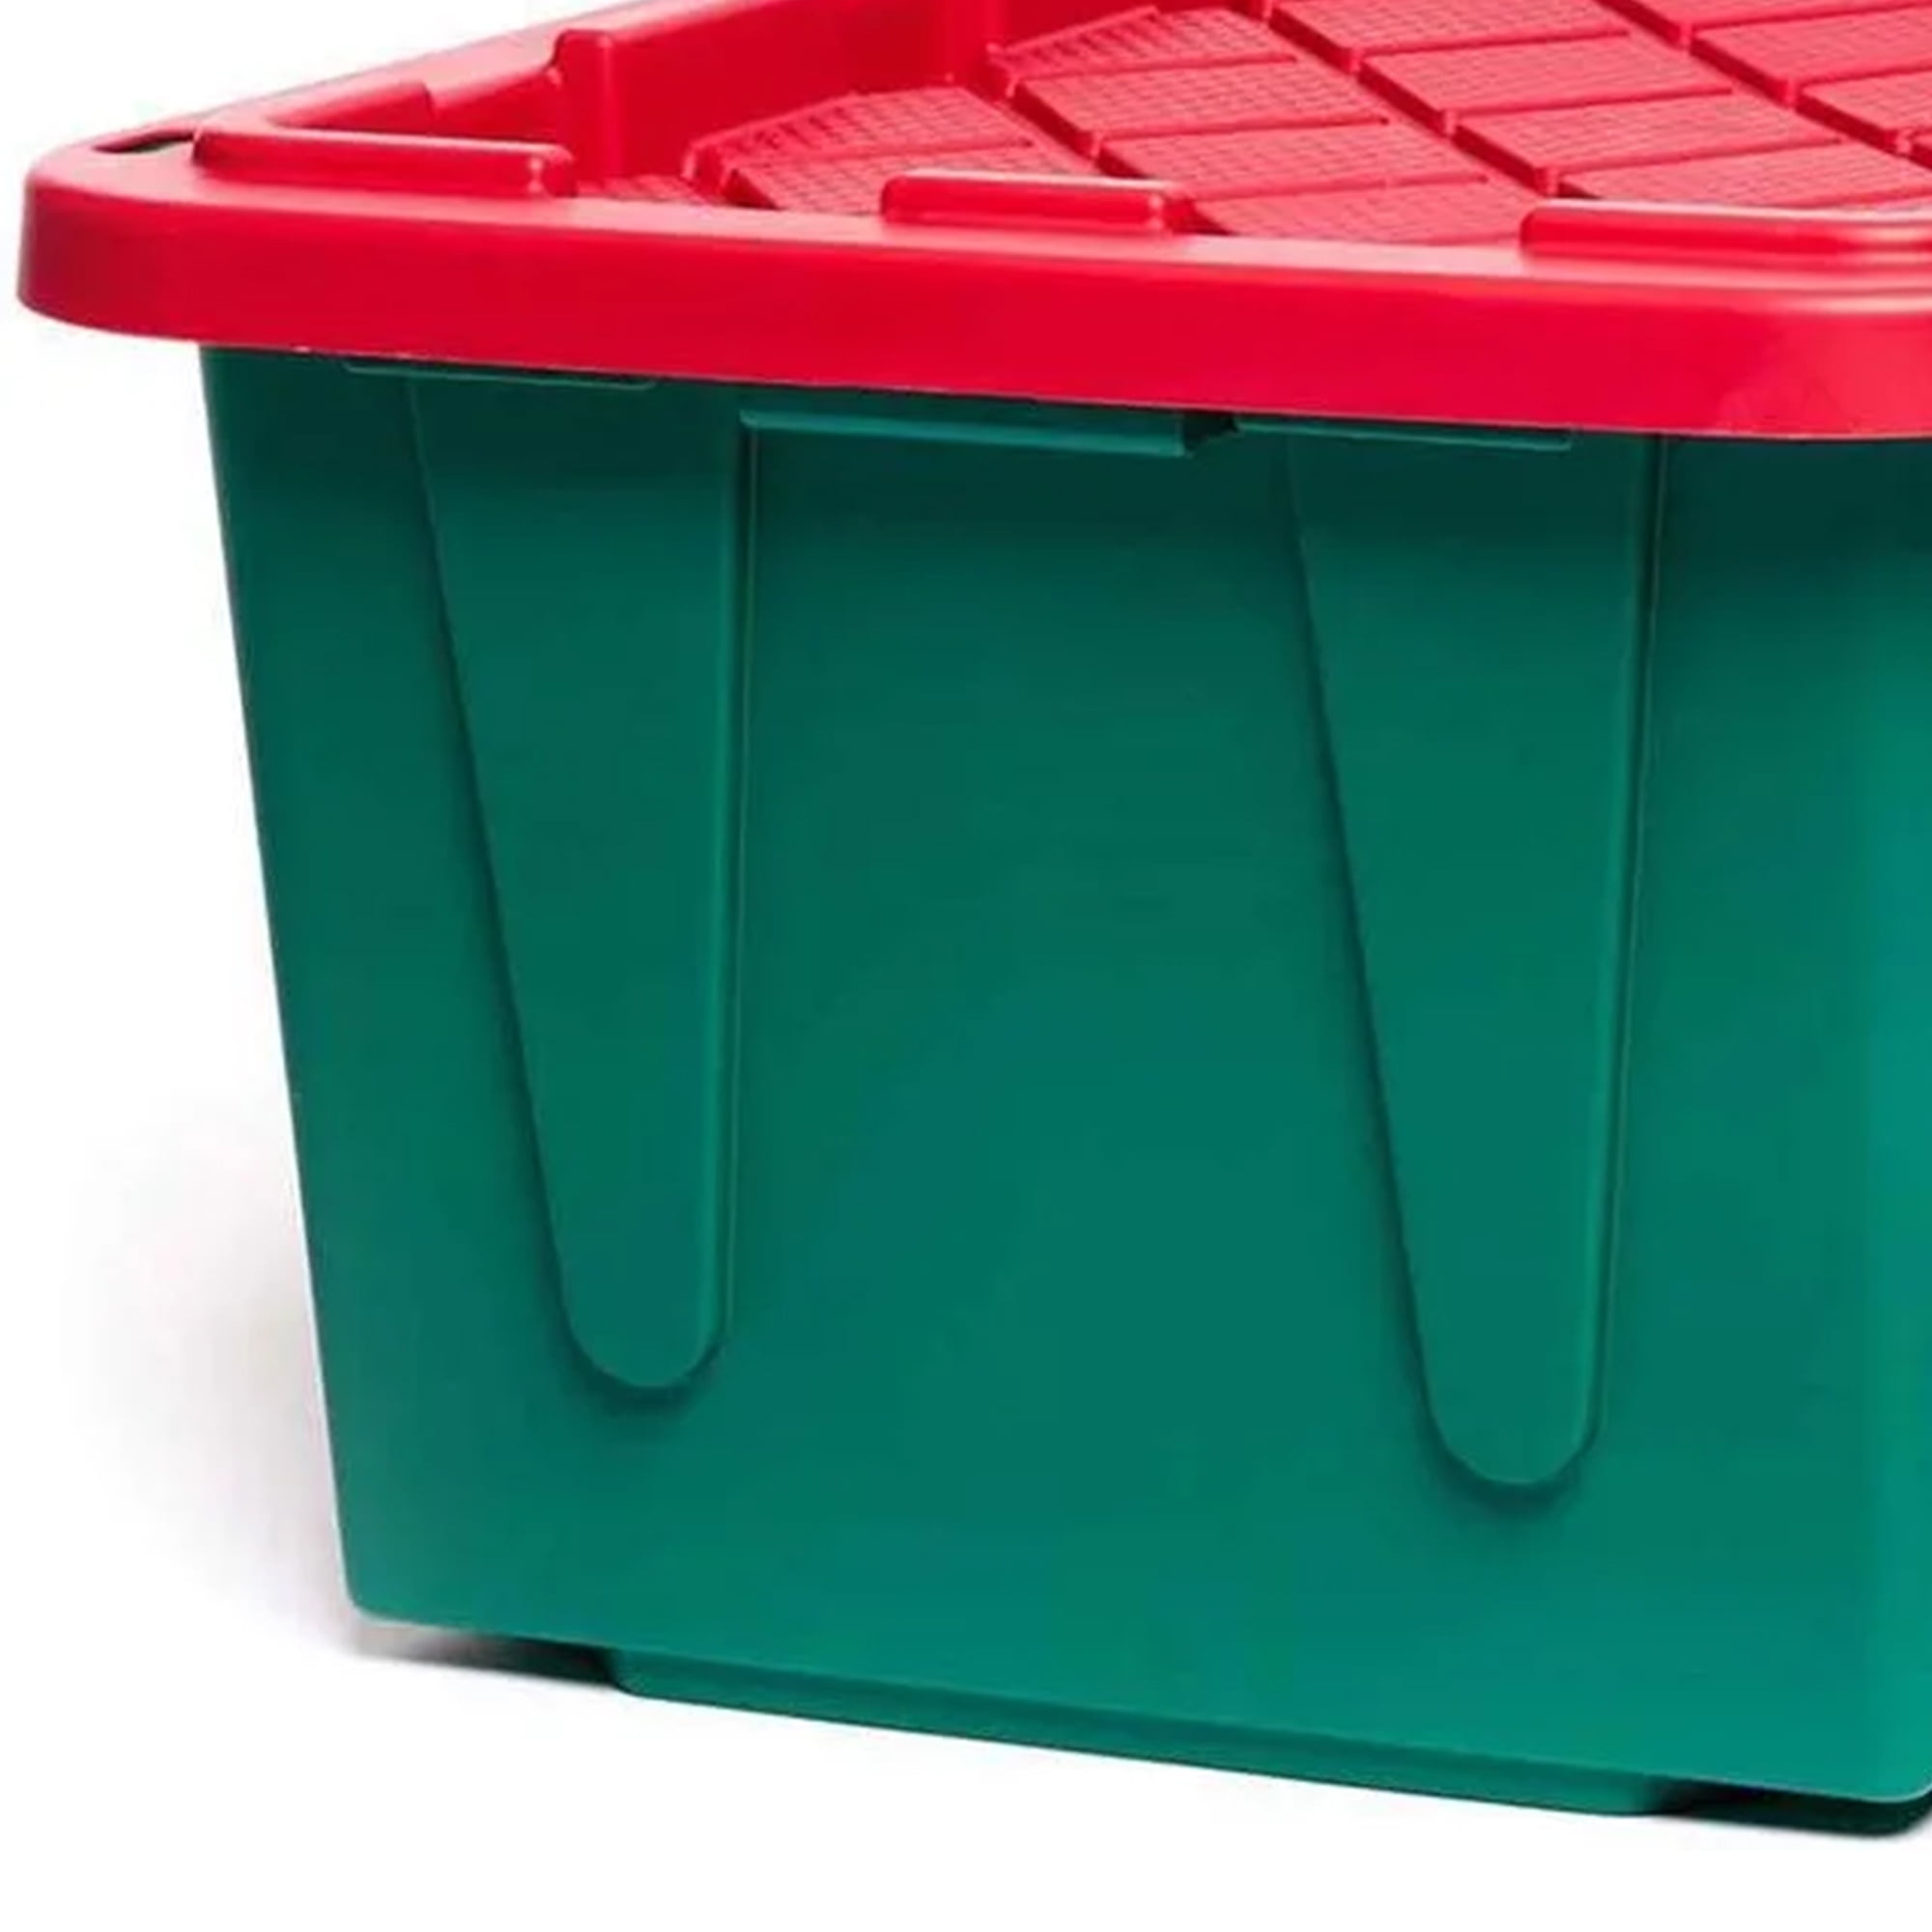 HOMZ Durabilt 15 Gallon Heavy Duty Holiday Storage Tote, Green/Red (2  Pack), 1 Piece - Foods Co.